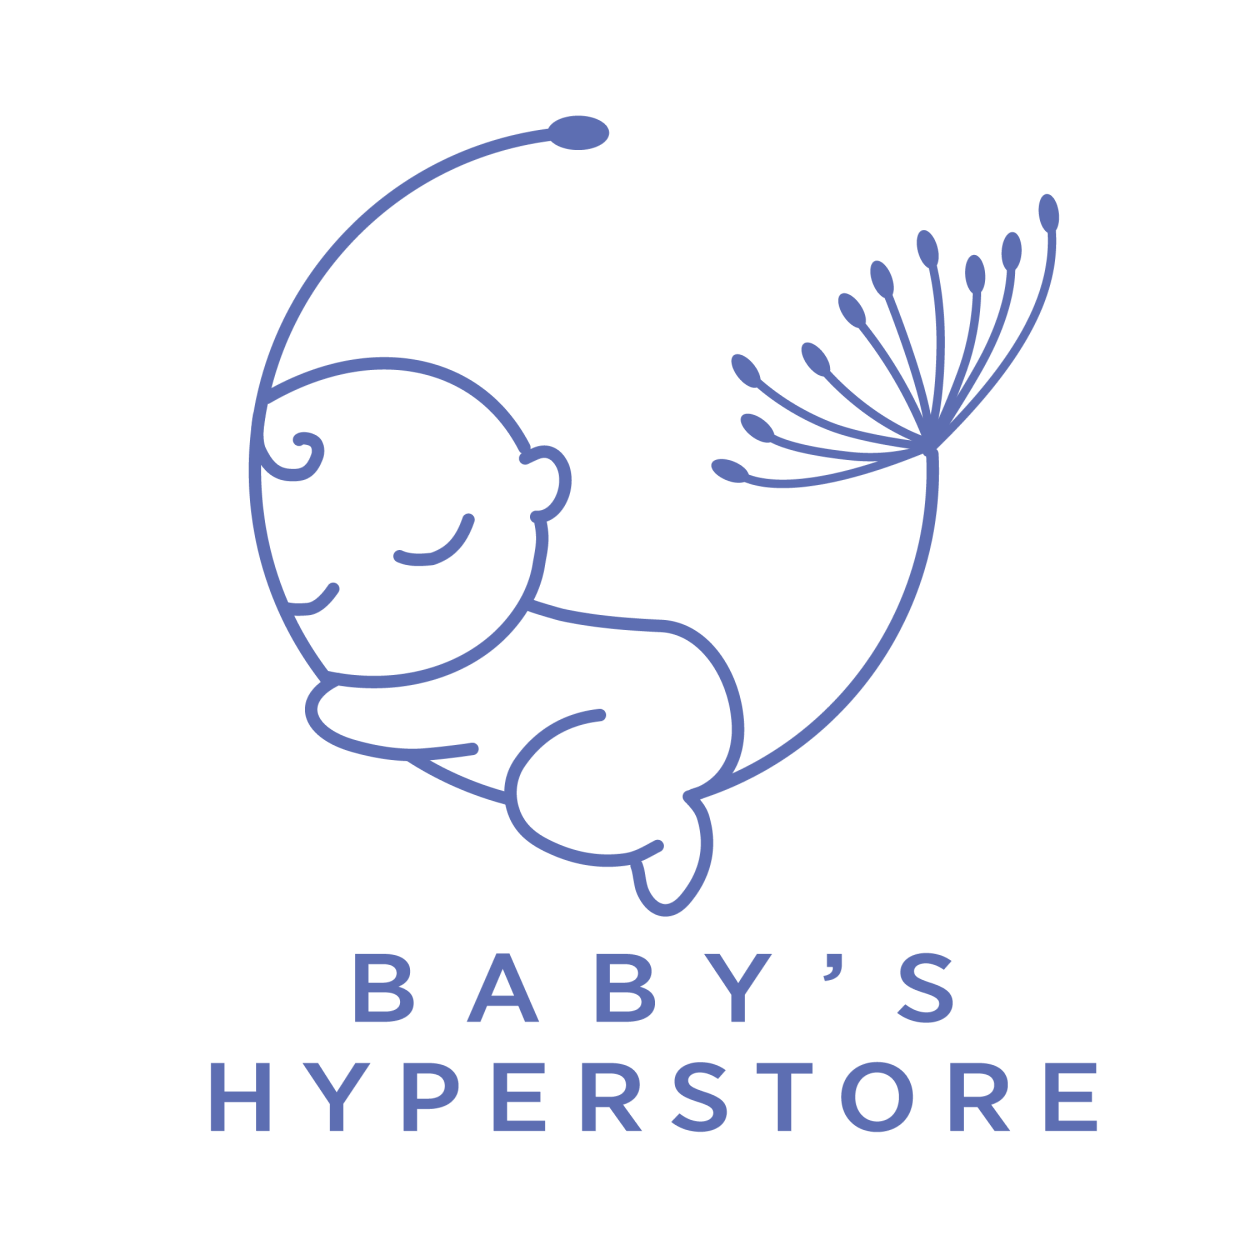 Company logo for Baby's Hyperstore Pte. Ltd.